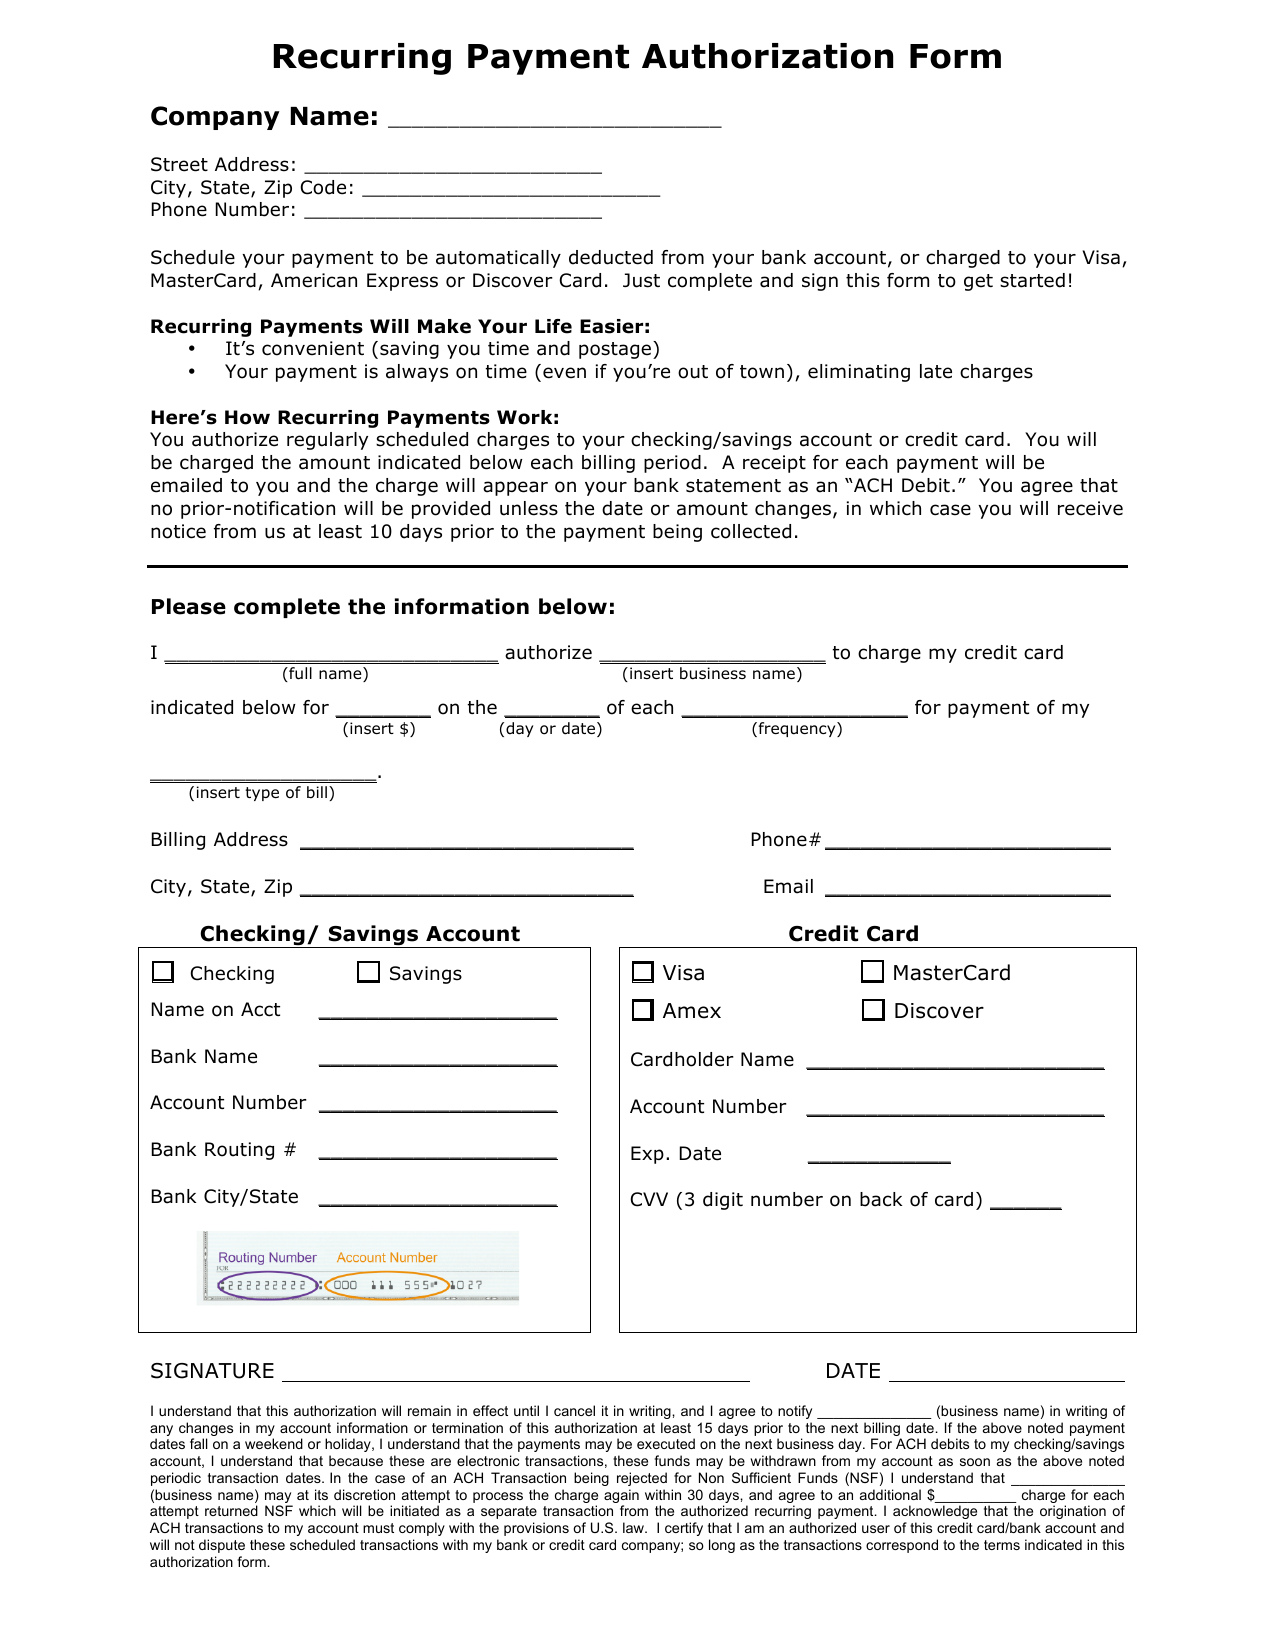 Download Recurring Payment Authorization Form Template Credit Card